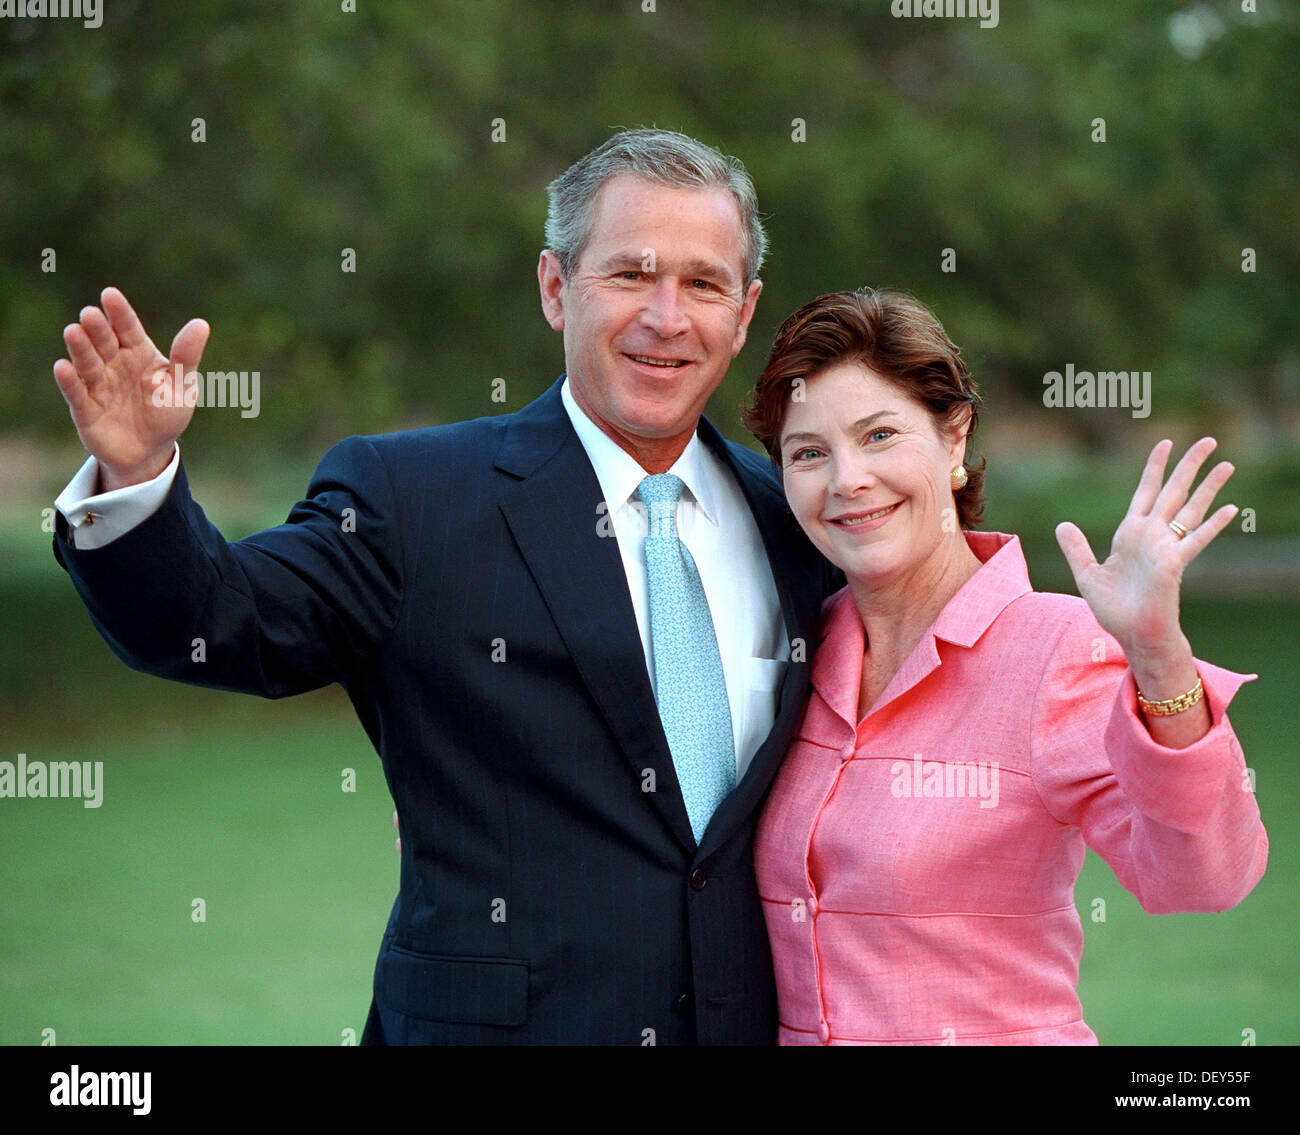 US President George W. Bush and First Lady Laura Bush in their official portrait at the White House June 20, 2004 in Washington, DC Stock Photo